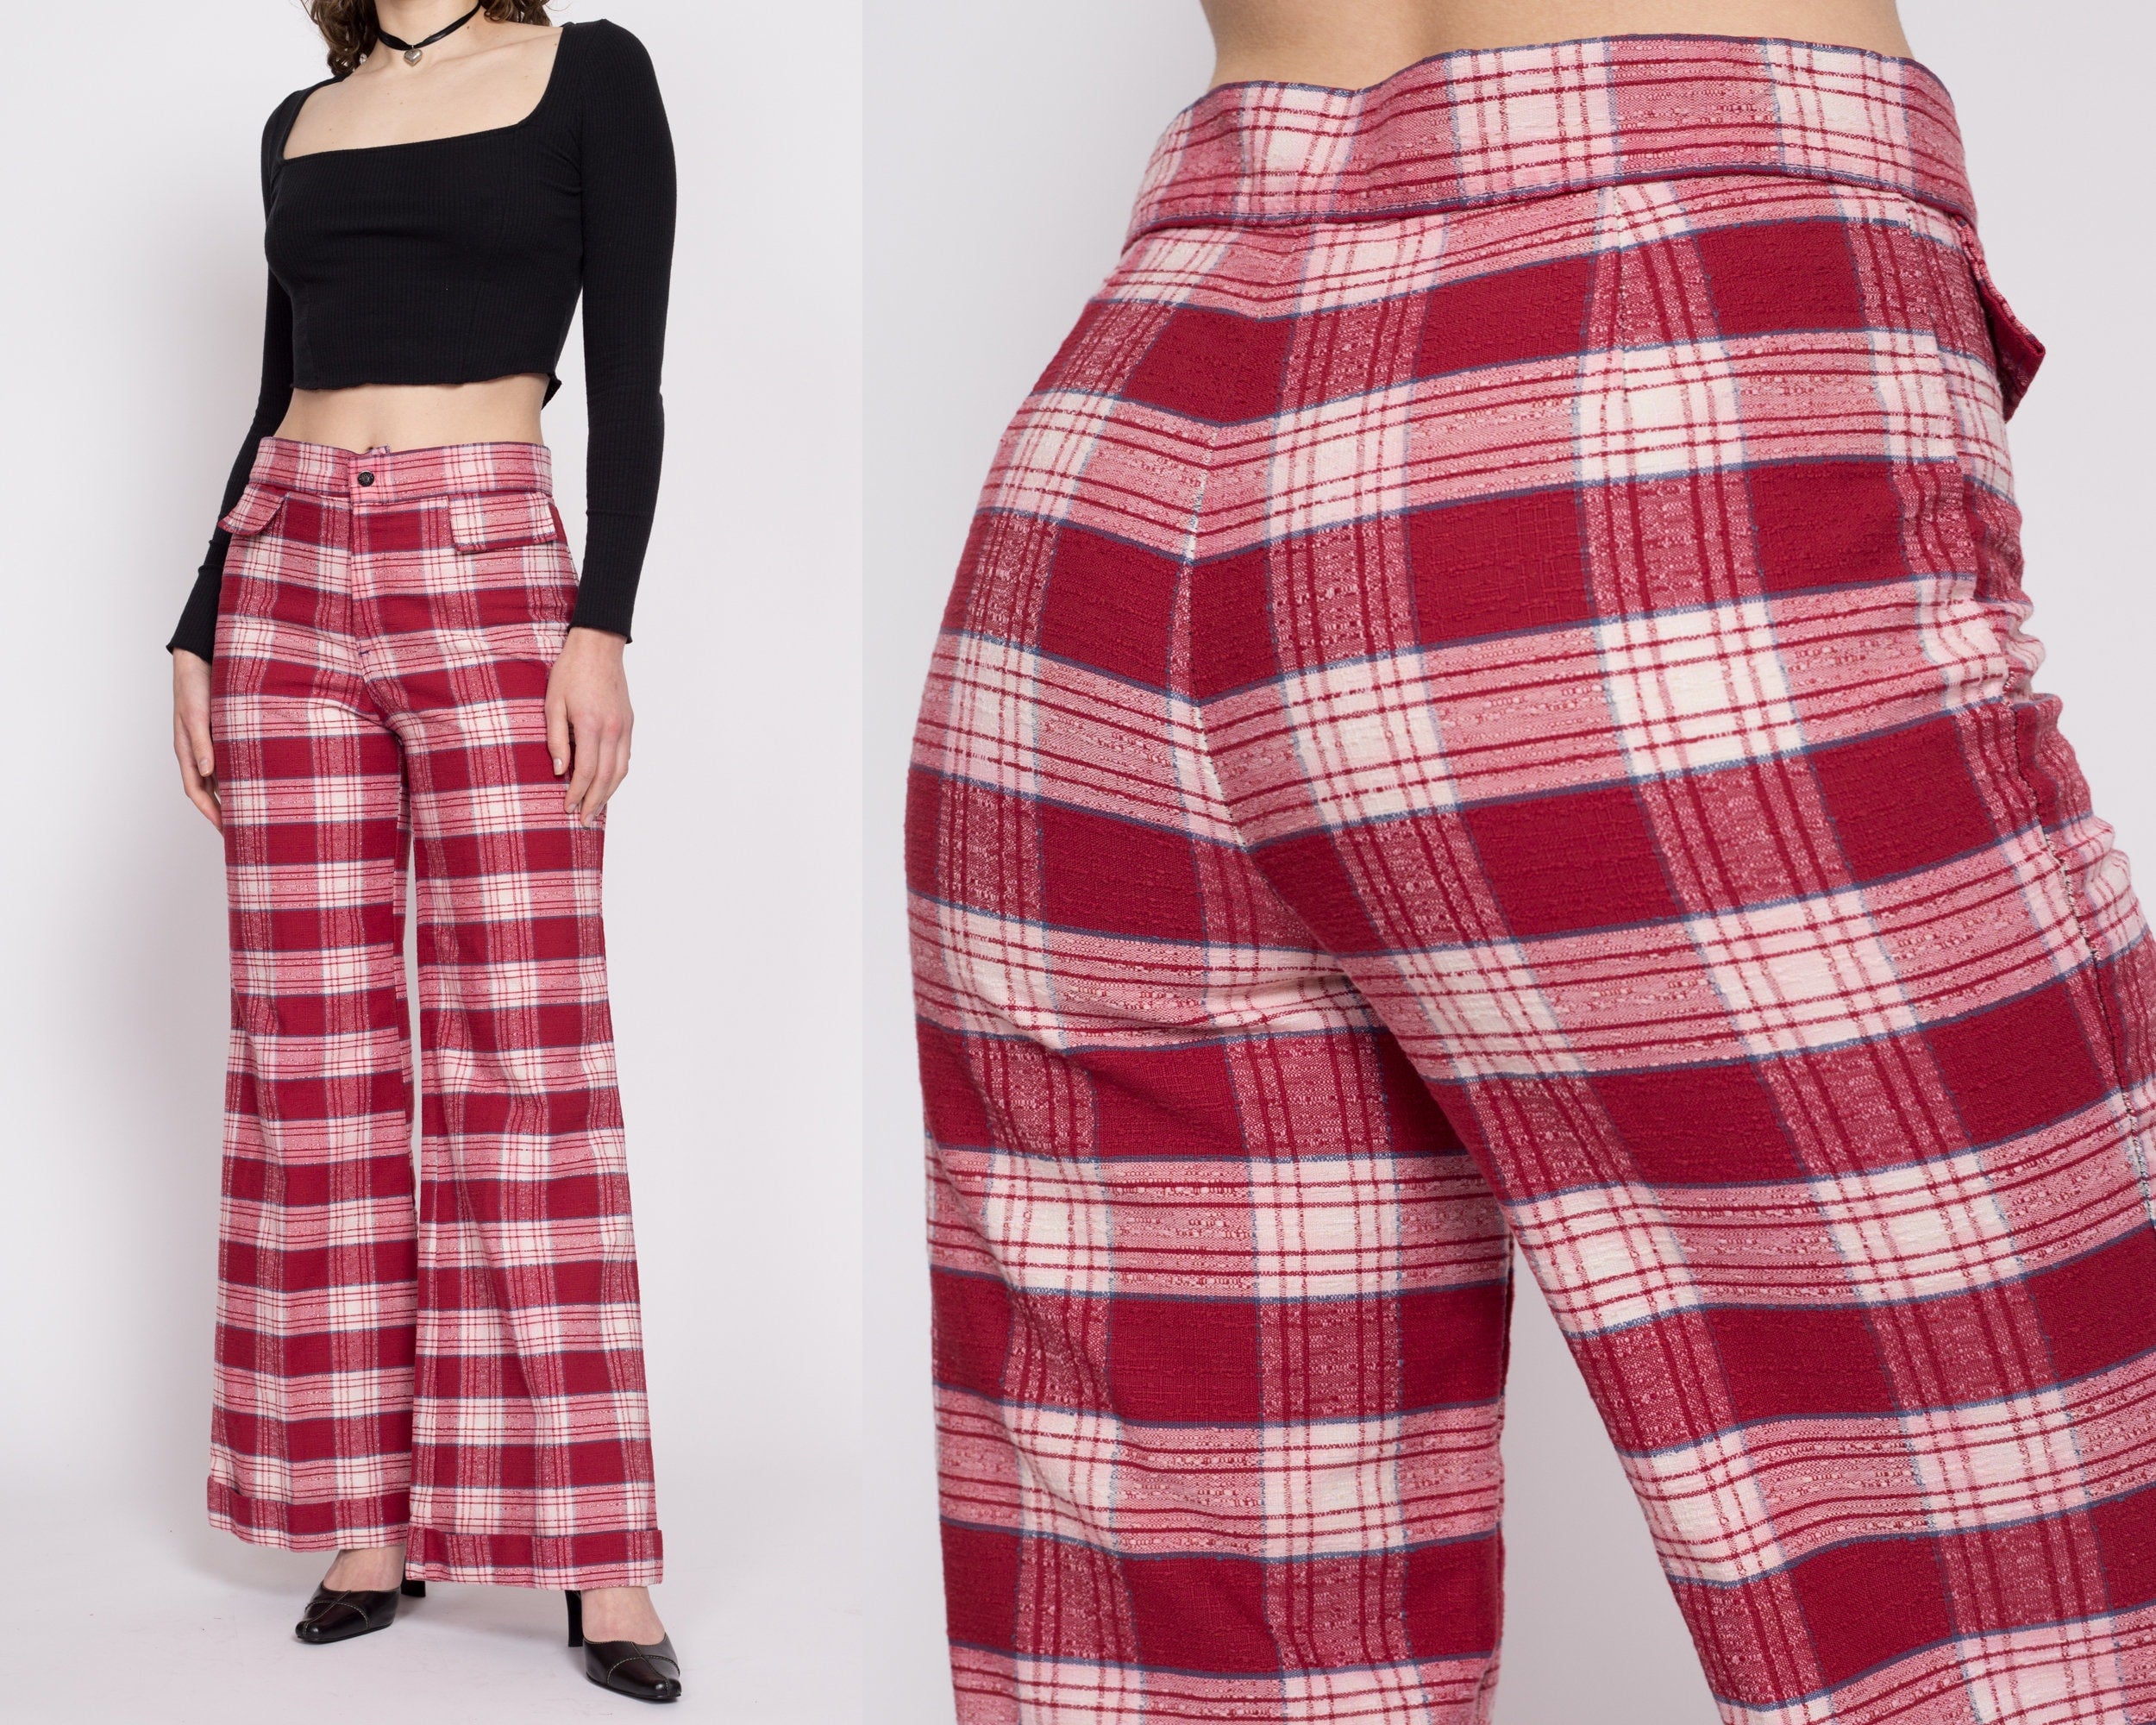 70s Red Plaid High Waisted Pants - Men's Small, Women's Medium, 31"